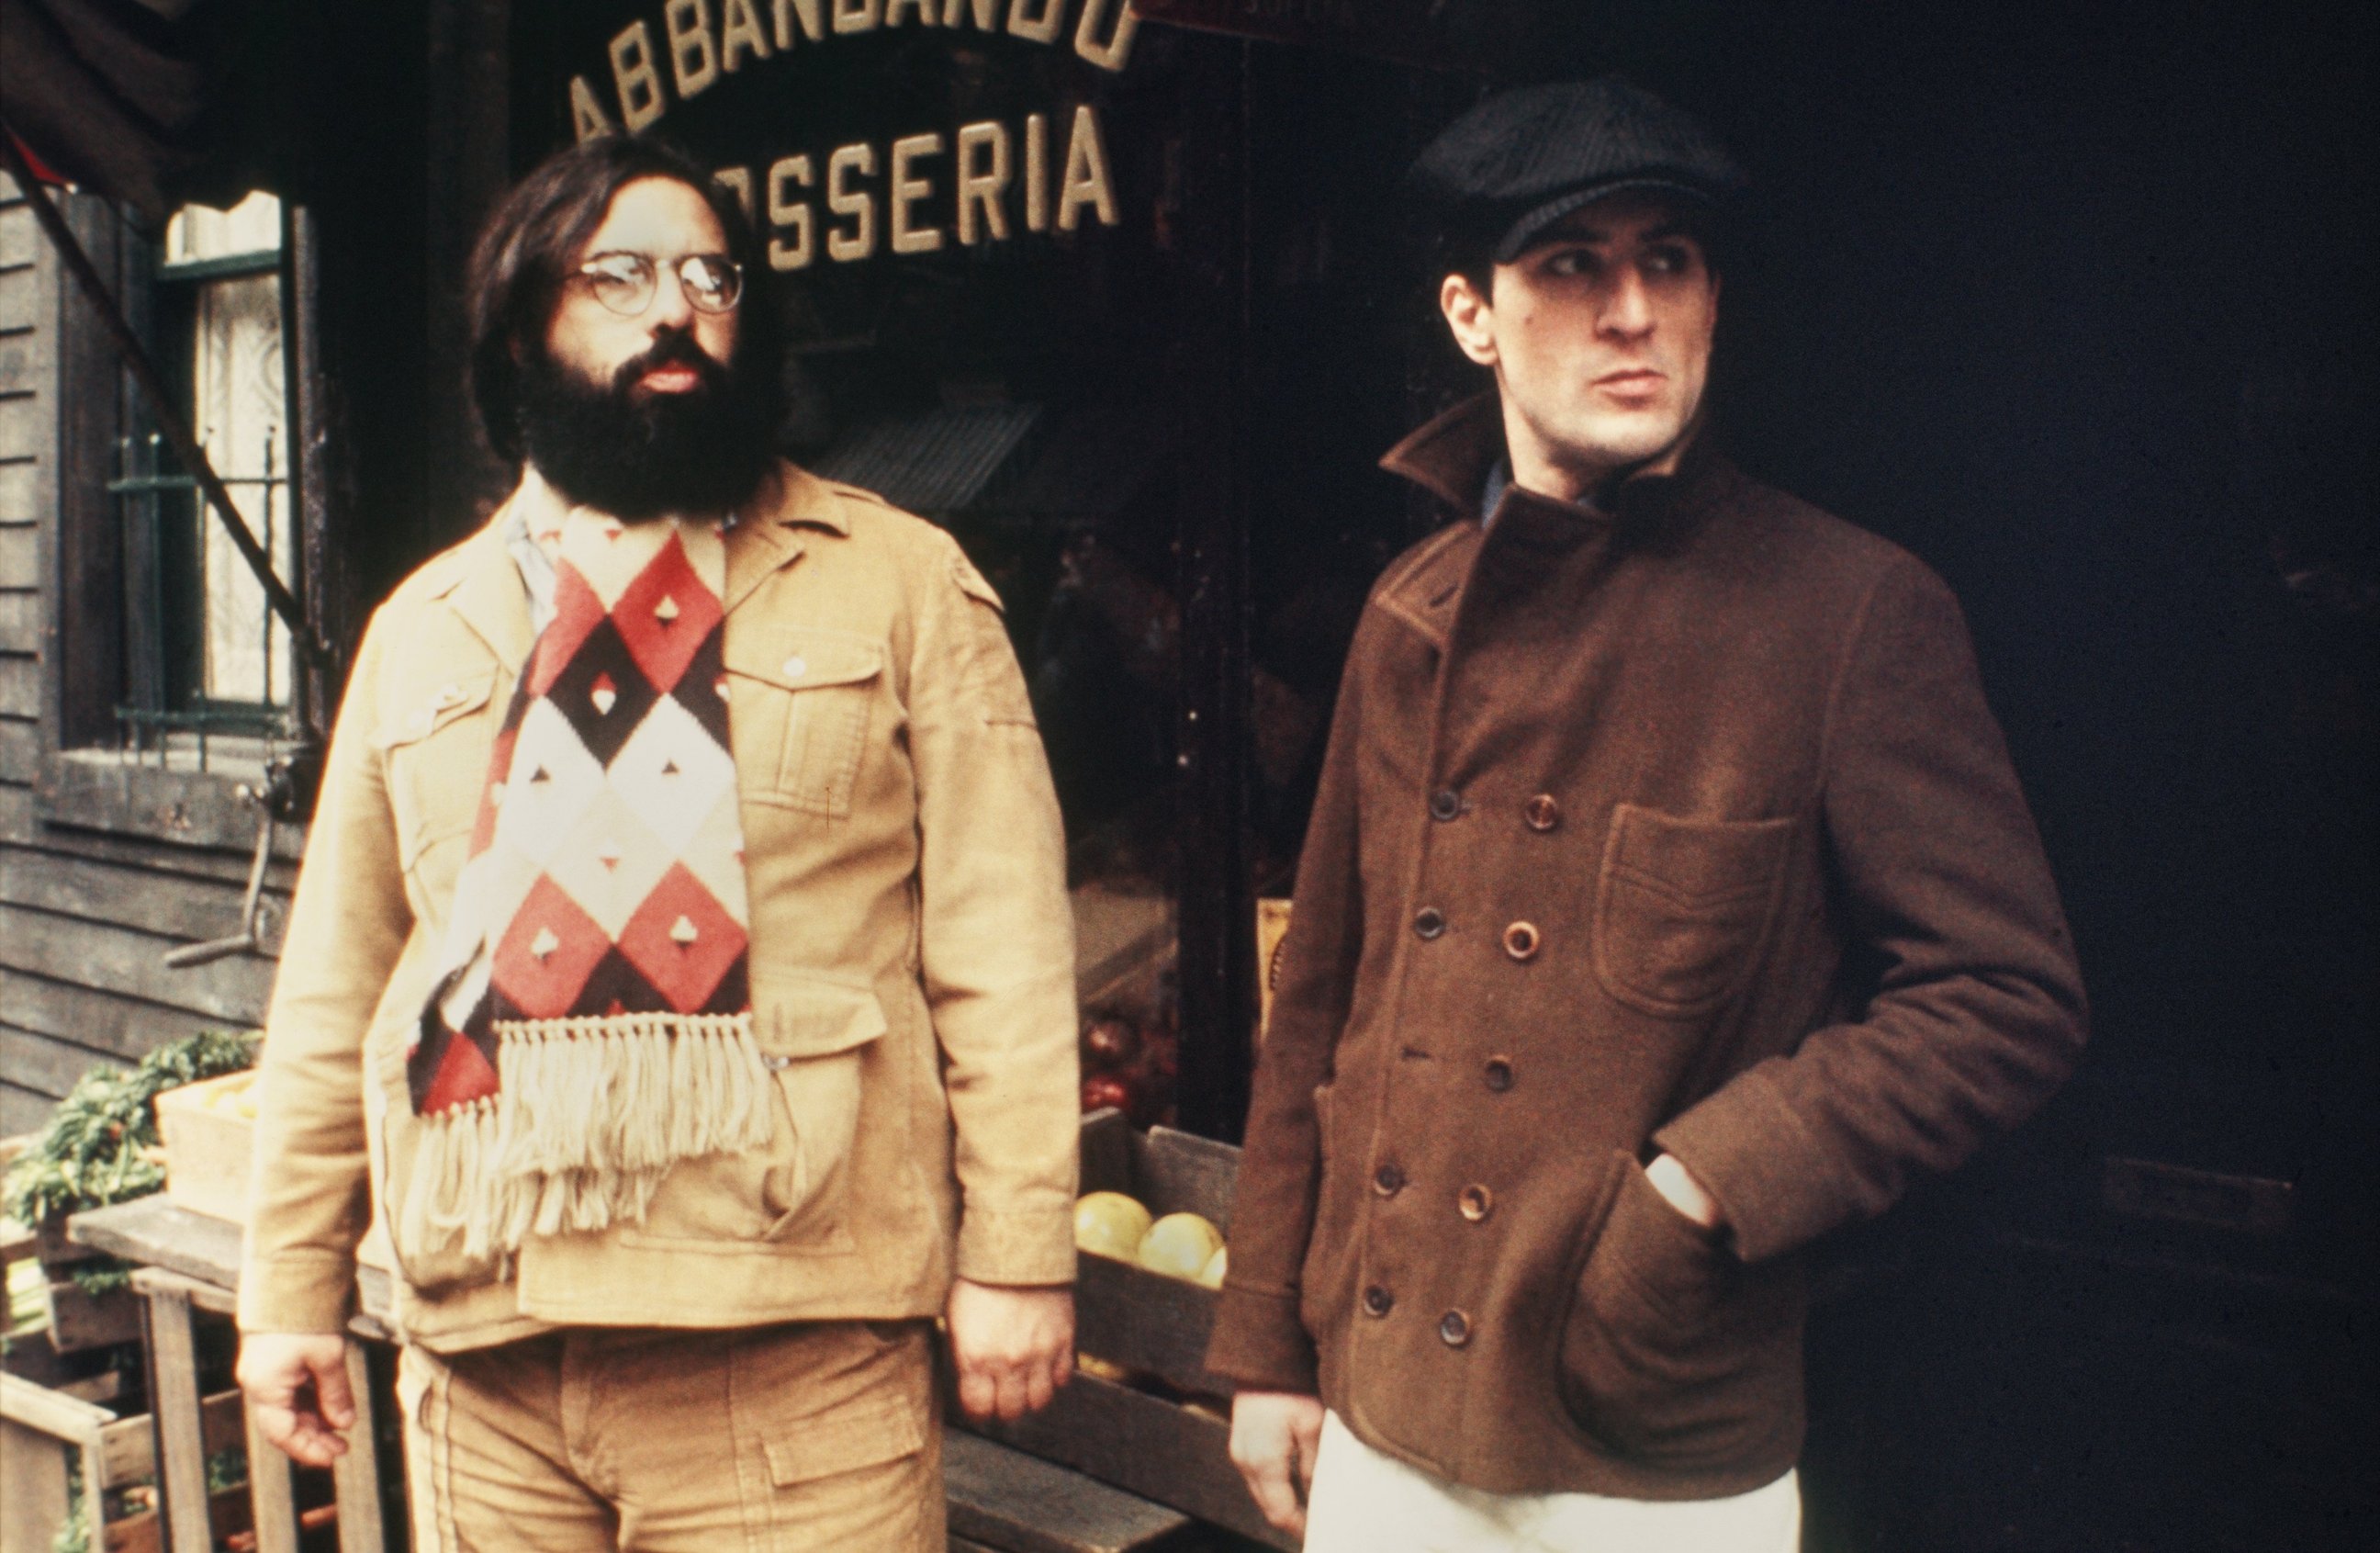 PHOTO: Director Francis Ford Coppola guides Robert De Niro in a scene in The Godfather Part II in 1974 in New York. 